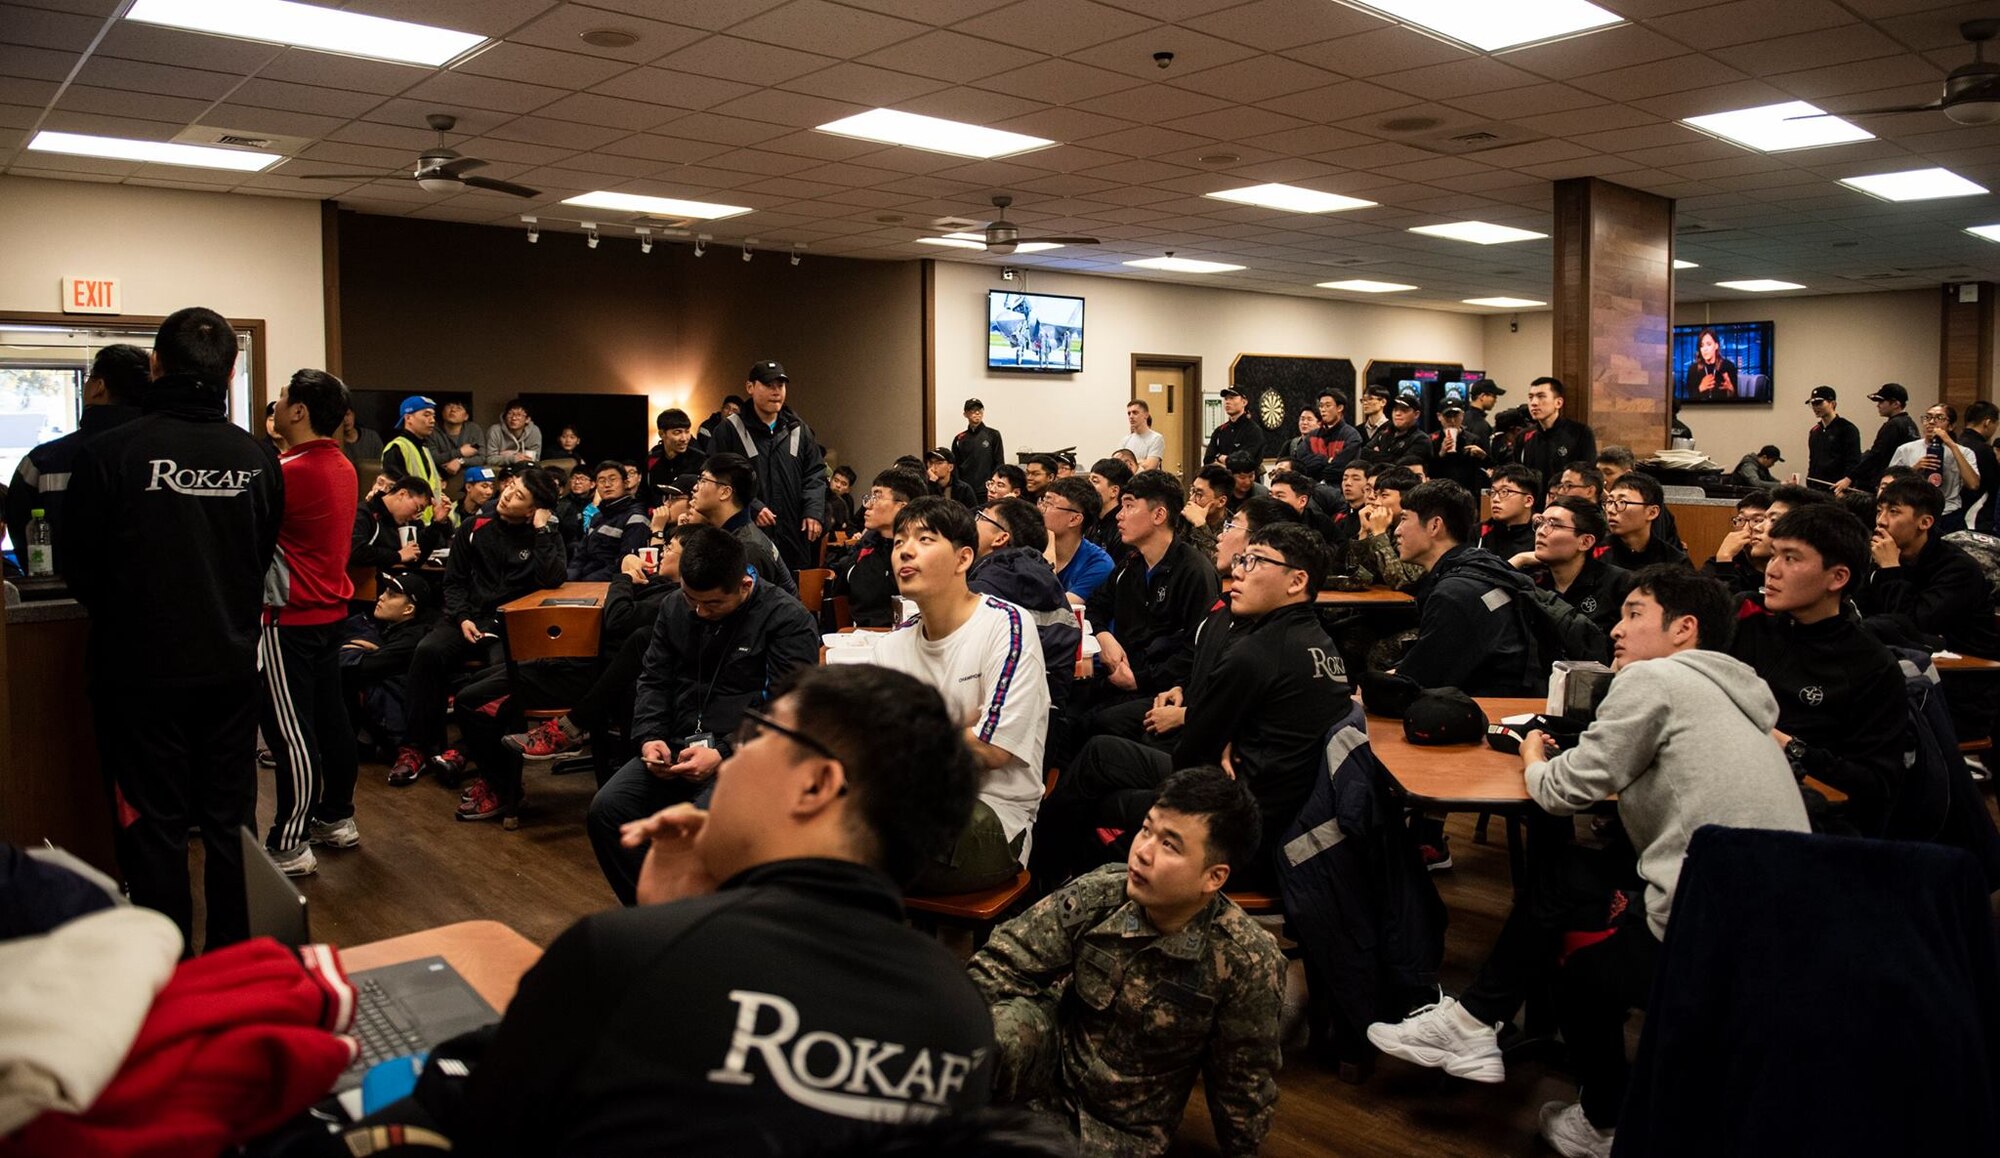 8th Fighter Wing and 38th Fighter Group members spectate a “League of Legends” video game match at Kunsan Air Base, Republic of Korea, Nov. 9, 2018. The US-ROKAF Friendship Day focused on celebrating the partnership and alliance between the 8th Fighter Wing and 38th Fighter Group, who participated in several sporting events and competitions throughout the day. (U.S. Air Force photo by Senior Airman Stefan Alvarez)